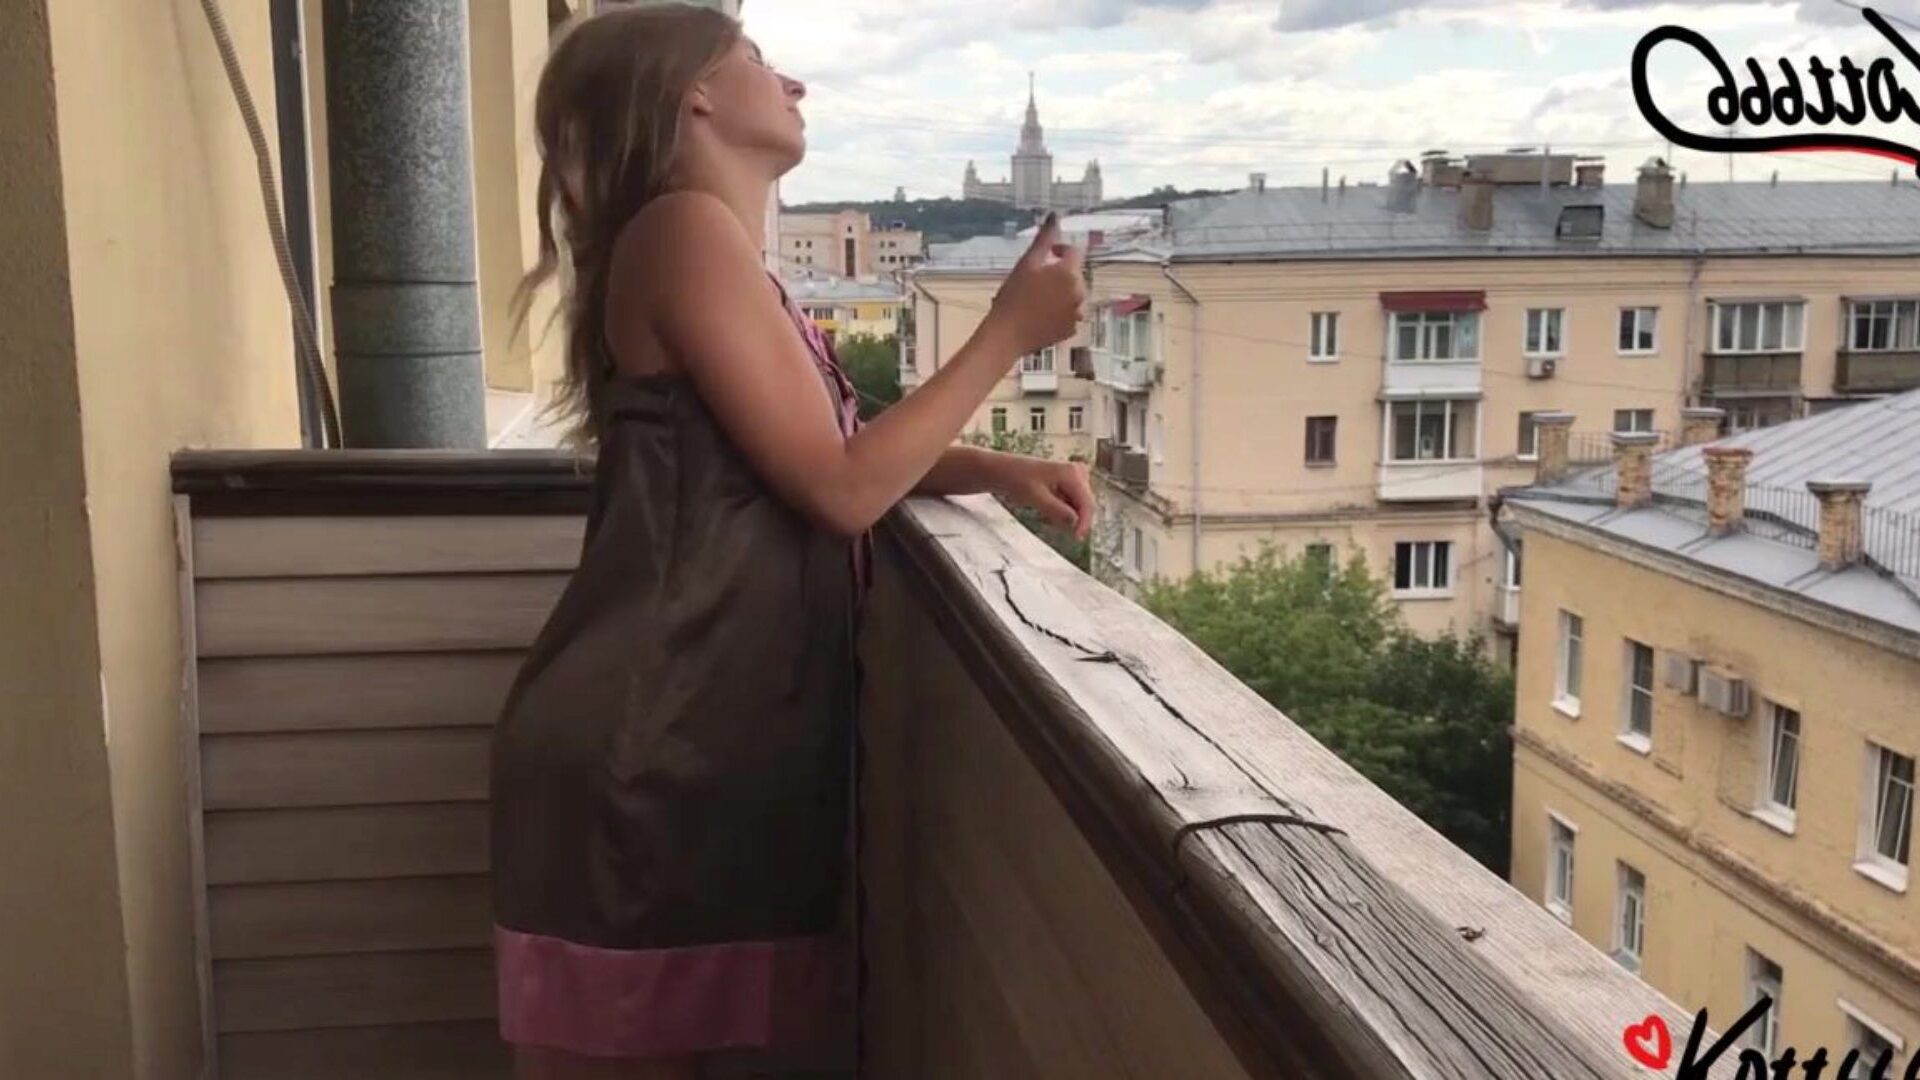 Outdoor public intercourse on the balcony | standing doggystyle